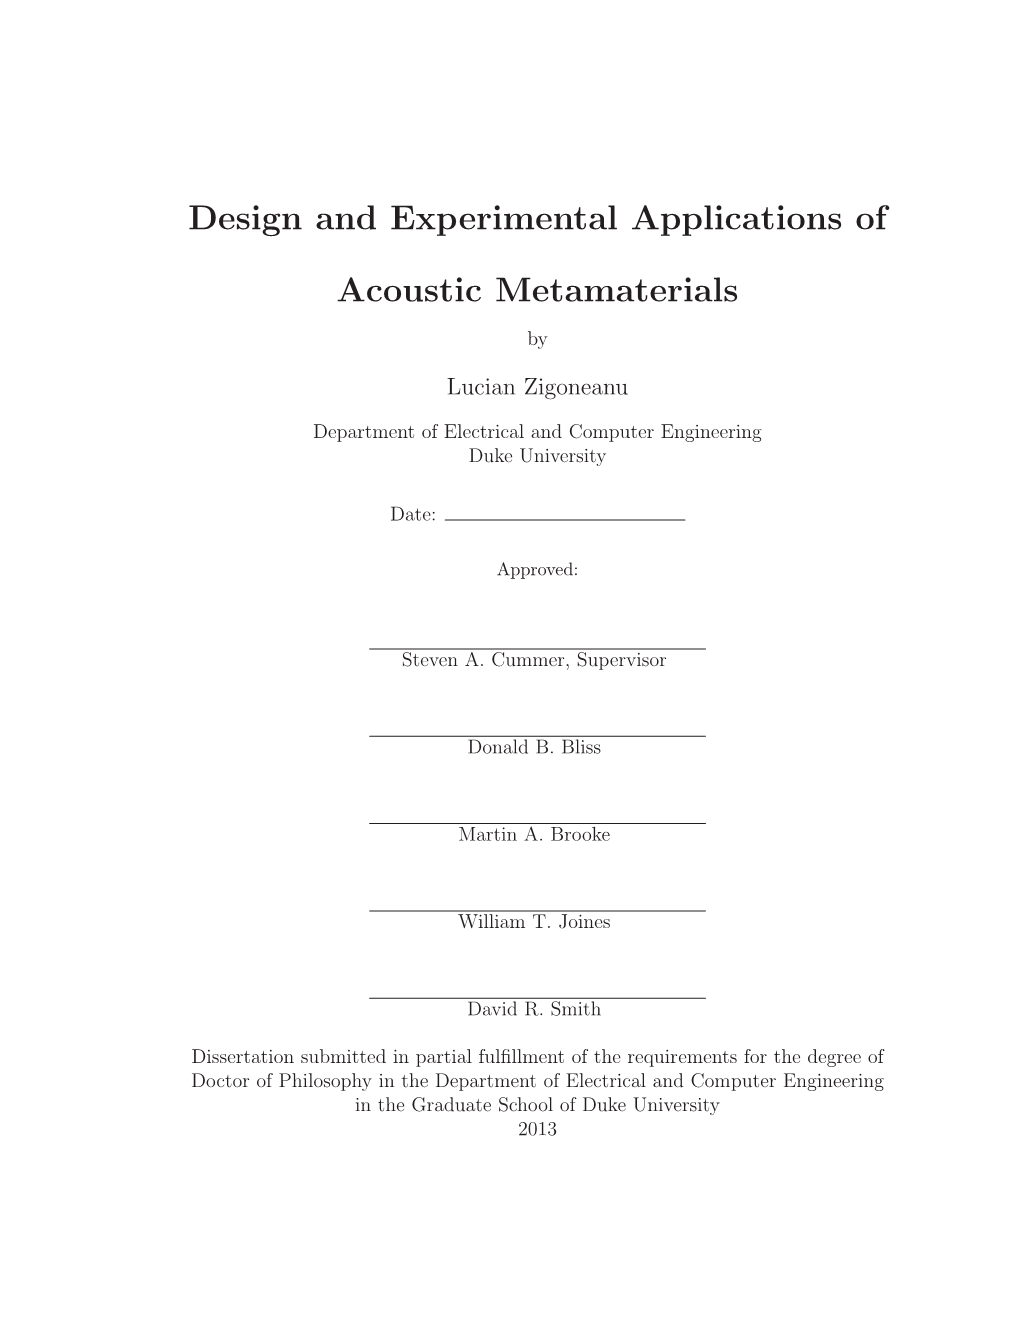 Design and Experimental Applications of Acoustic Metamaterials